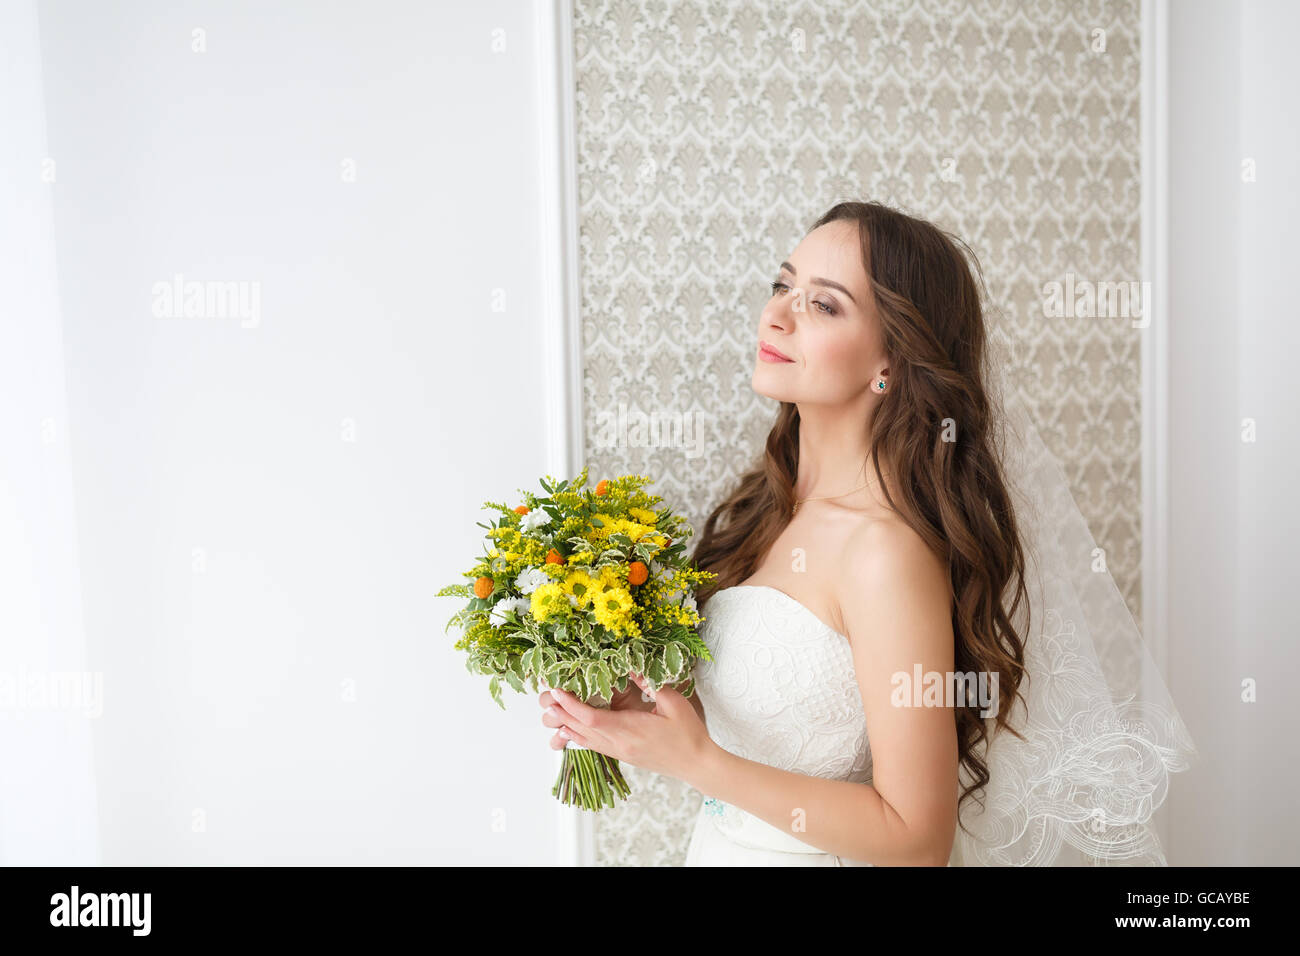 Happy bride holding a wedding bouquet in a studio Stock Photo